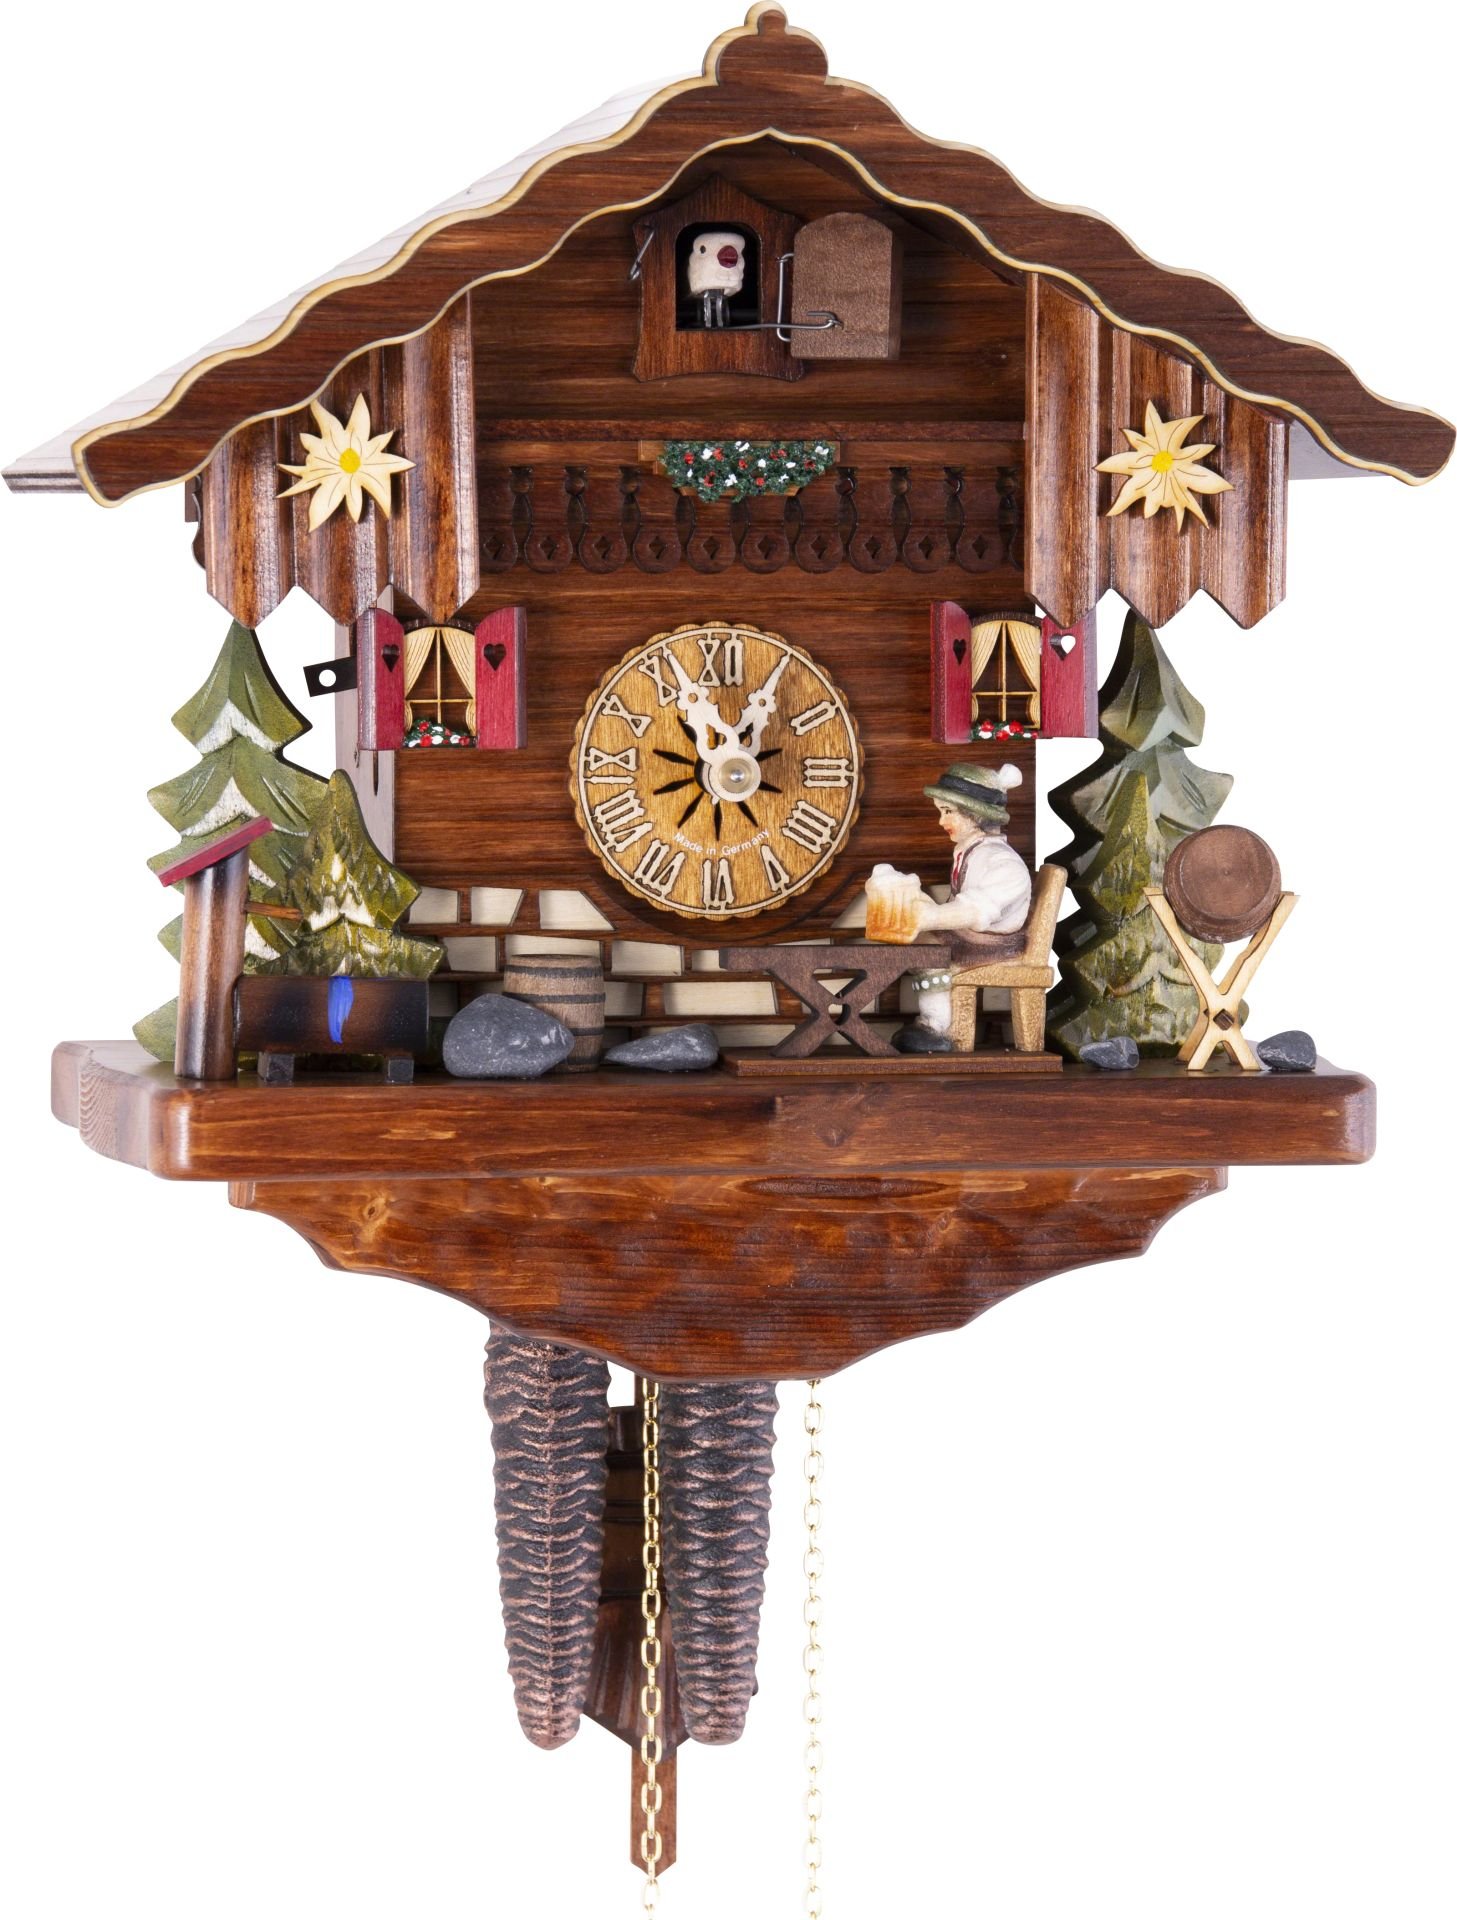 Cuckoo Clock Chalet Style 1 Day Movement 26cm by Hekas